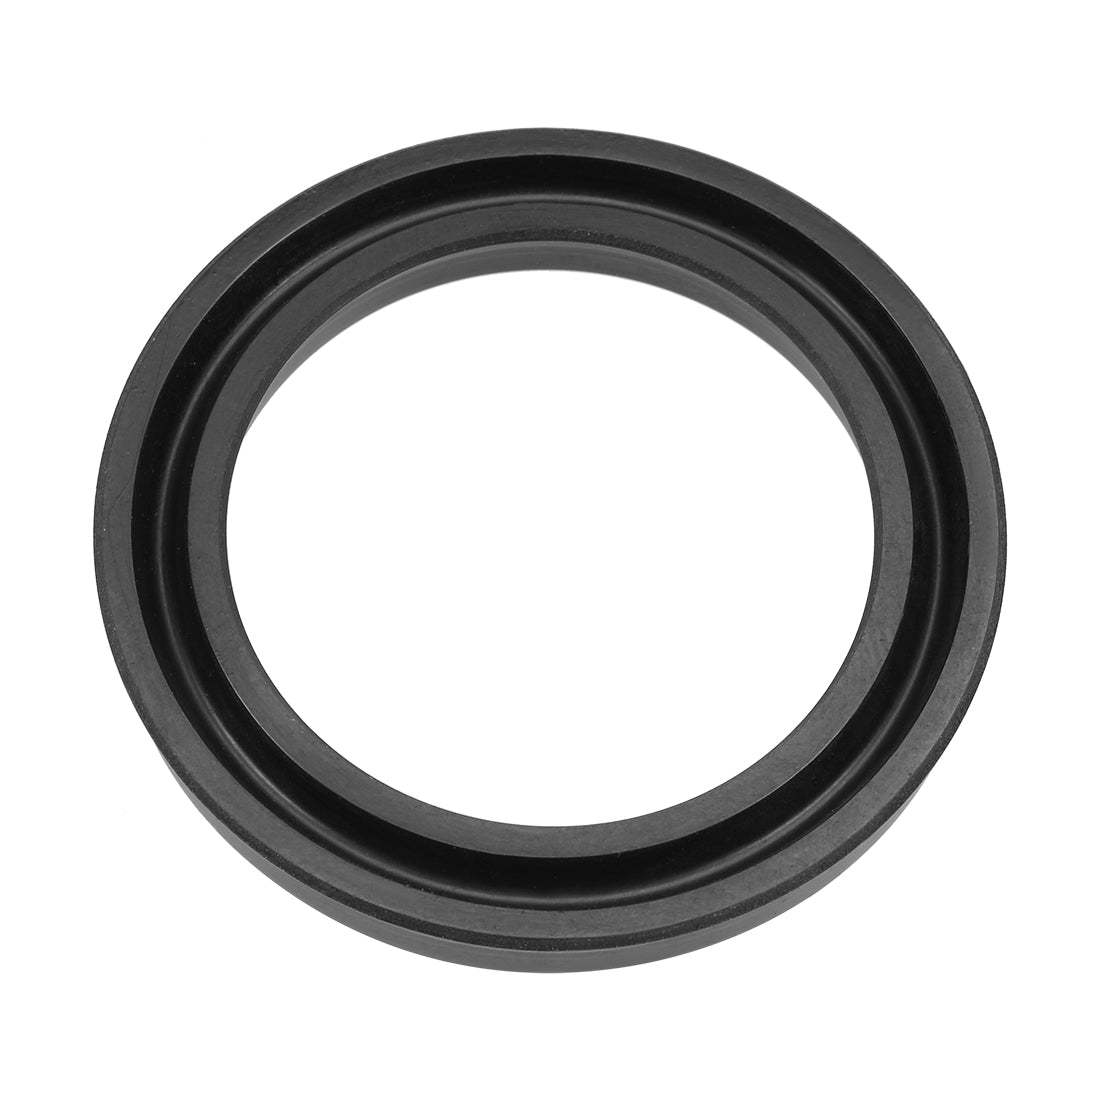 uxcell Uxcell Hydraulic Seal, Piston Shaft USH Oil Sealing O-Ring, 35mm x 45mm x 6mm